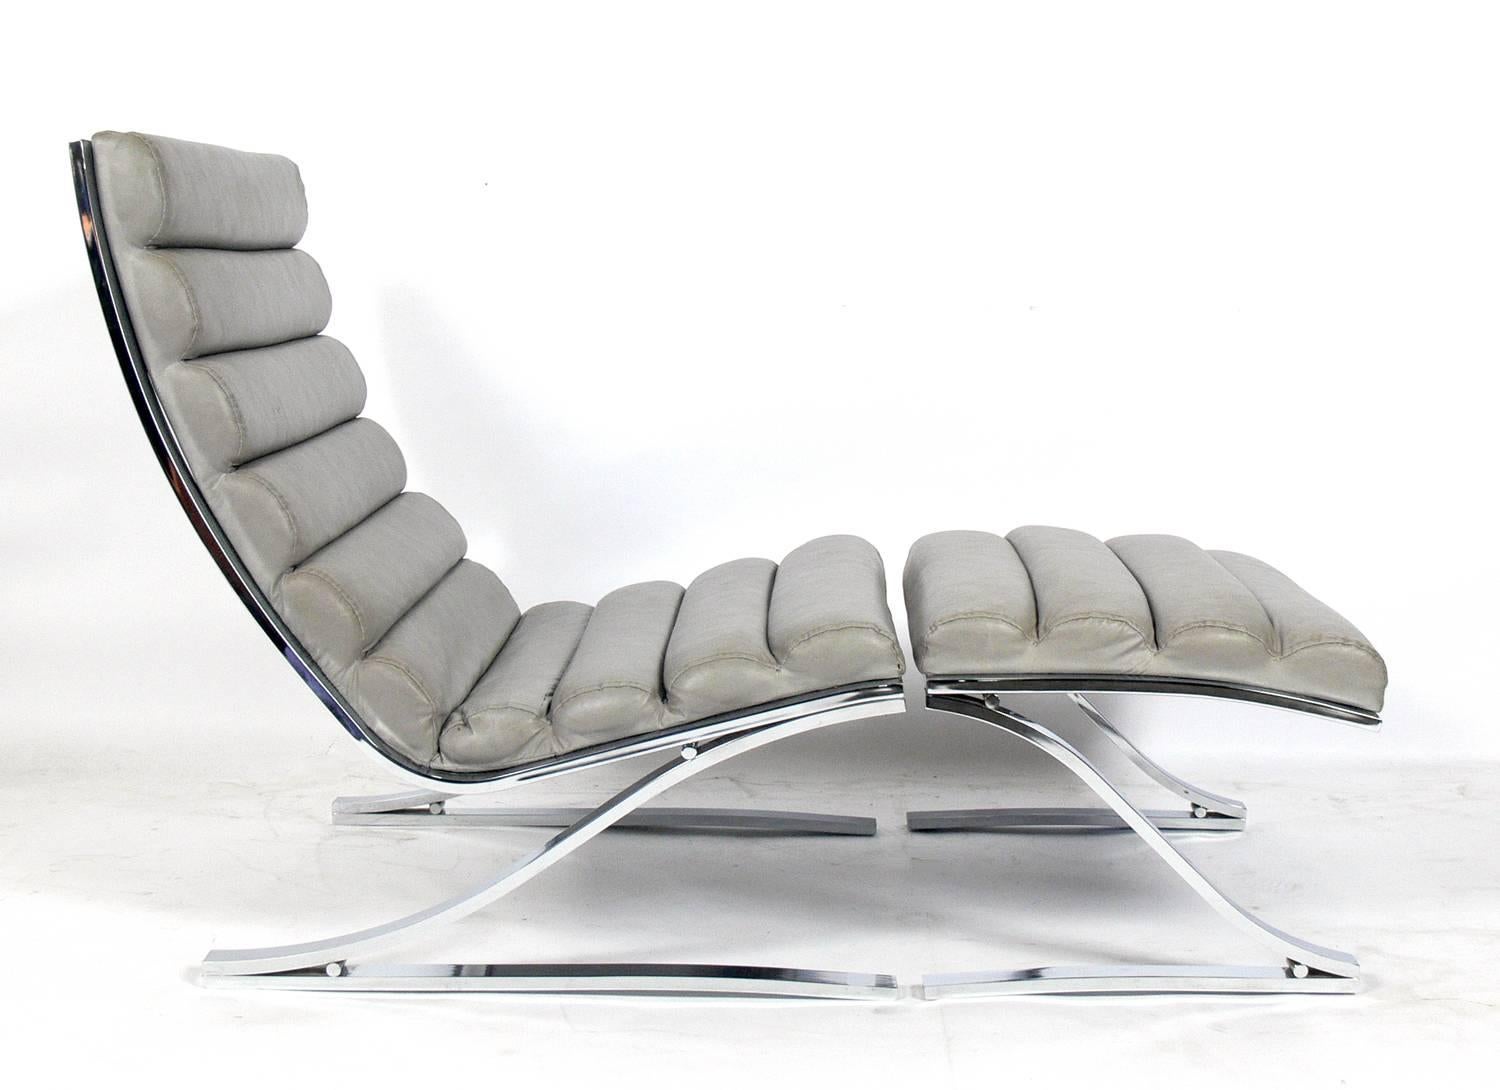 Mid-Century cantilevered chrome lounge chair and ottoman, designed by the design institute of America (DIA), American, circa 1960s. This chair is currently being reupholstered and can be completed in your fabric. The price noted below includes